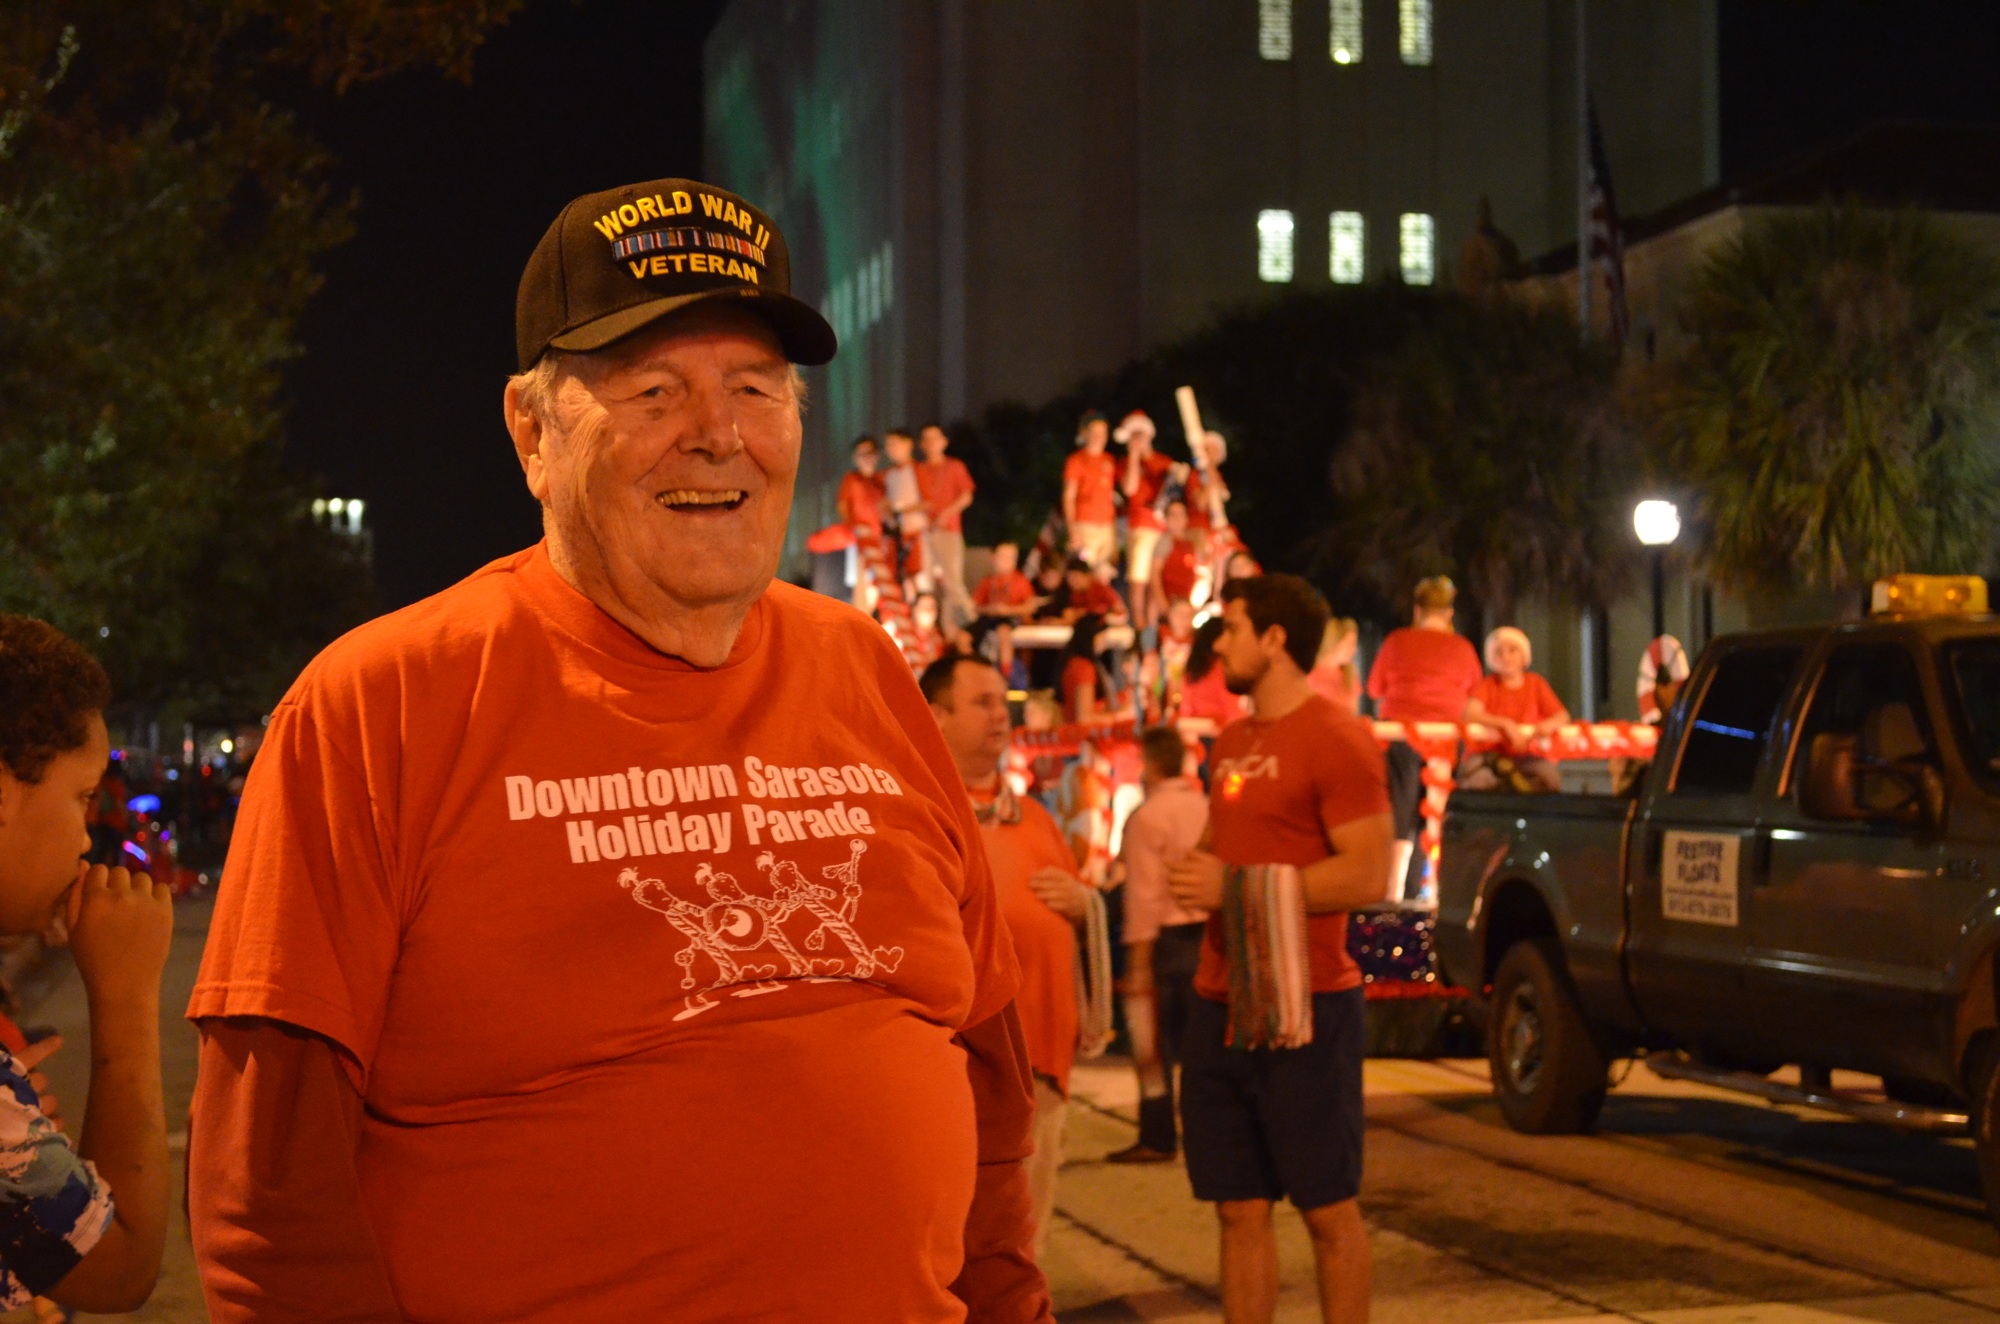 Will the Downtown Sarasota Holiday Parade keep marching on? Your Observer